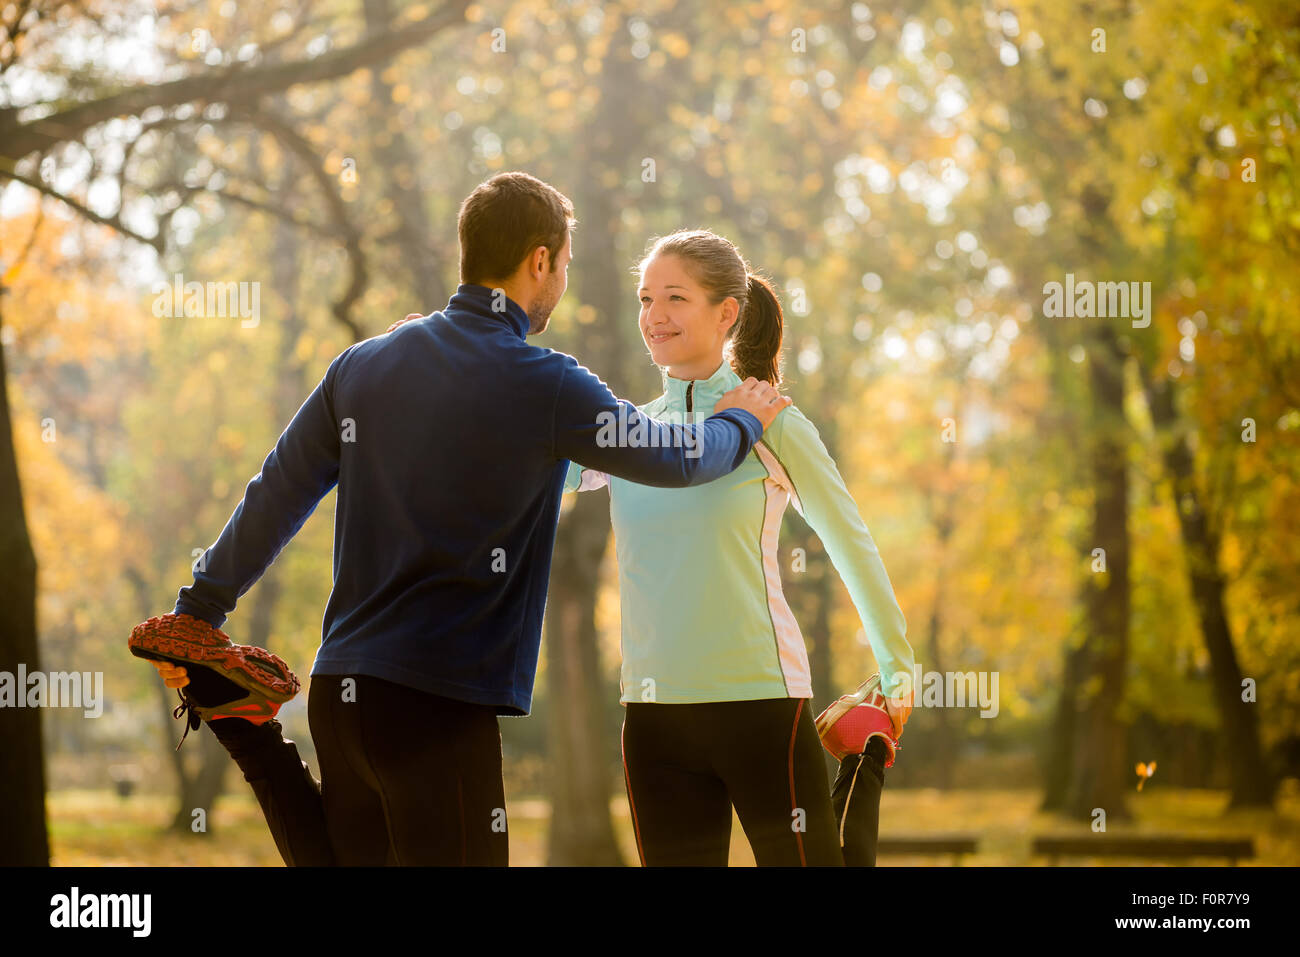 Young couple stretching legs before jogging in autumn nature Stock Photo